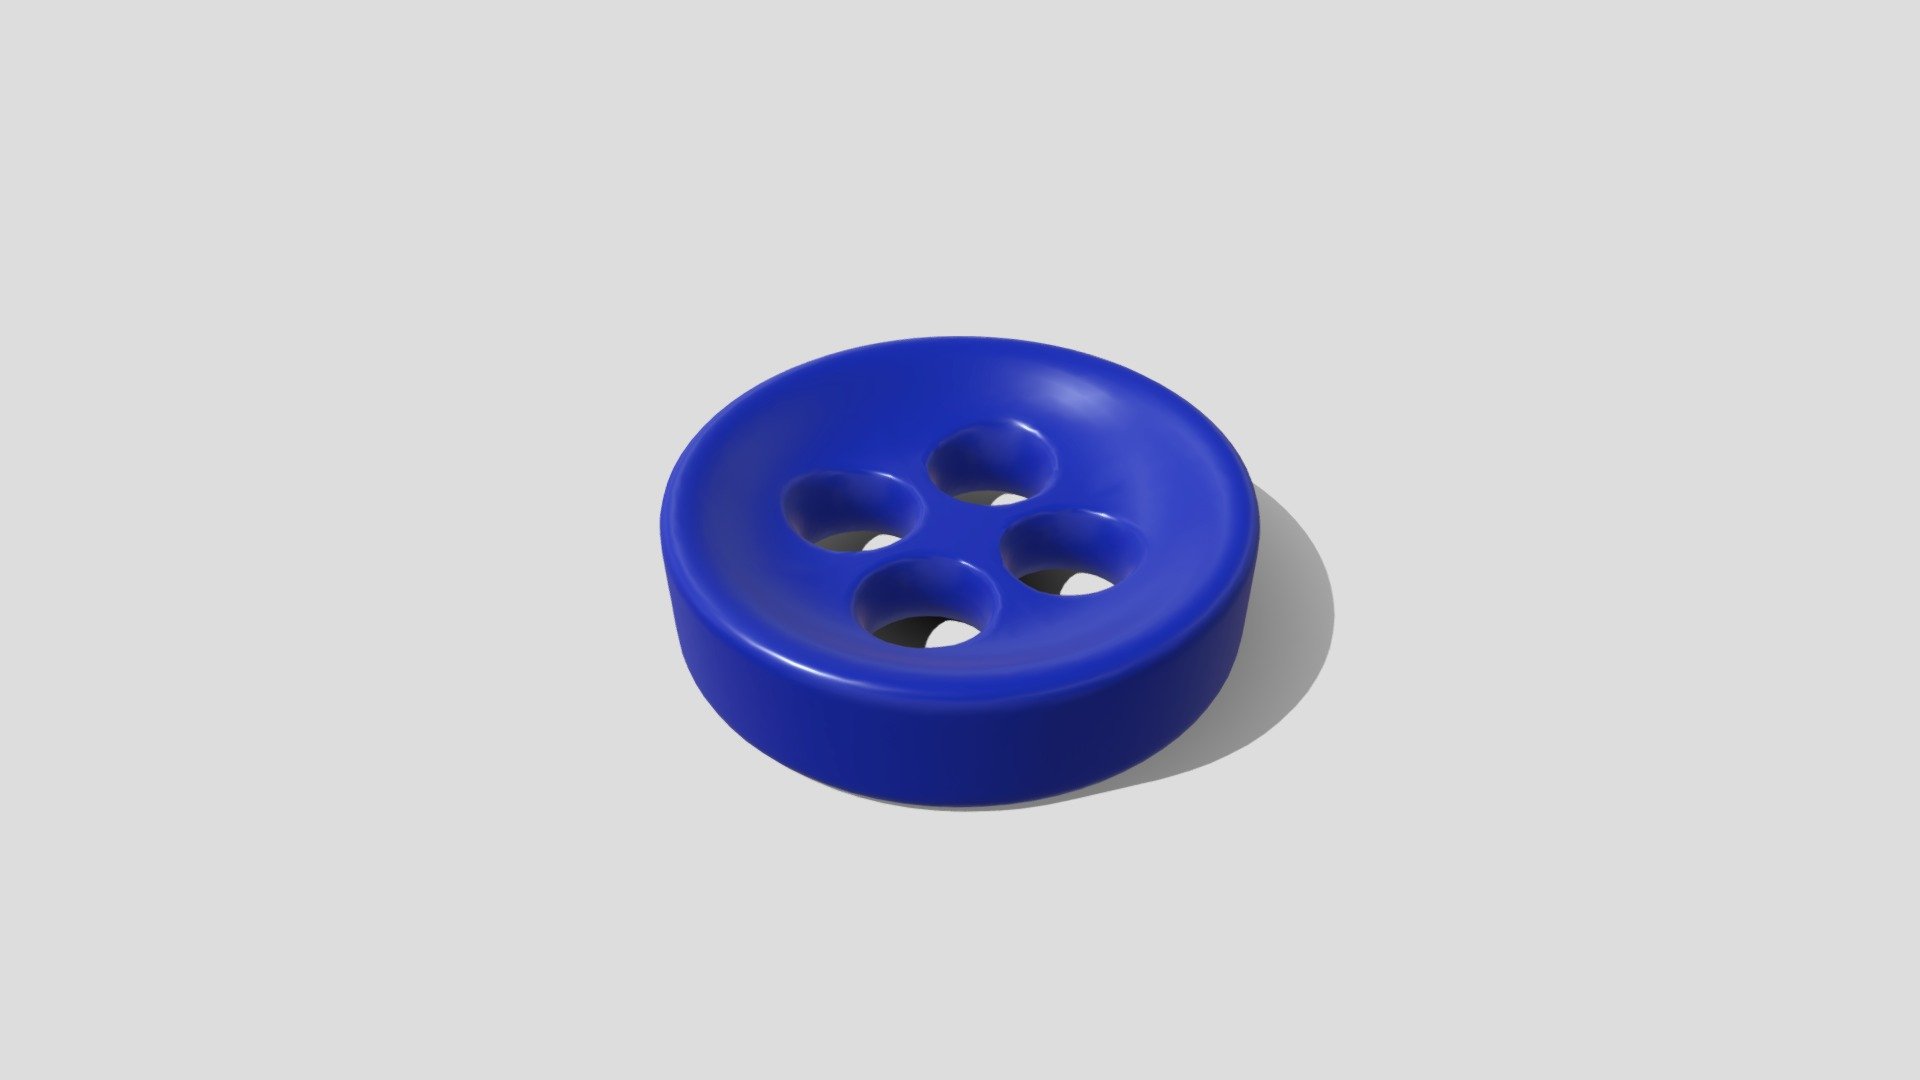 Printable Cloth Button. This Button meant to be printed only. So you can choose any PLA color you like and can print this Button easy.



This Button prints without any Supports or Brim. The Button has a high mesh Density to end up having soft edges. Print with 100% Infill and 0.1 Layerheight for a solid Result.

Sizes:

Button Diameter Ø: 1cm

Button Hole Diameter Ø: 2mm

Button Height: 2,5mm

Button Holes: 4


Print Settings:

Support: No

Brim: No

Layer Height: 0.1

Infill: 100% - Printable Cloth Button 001 - Ø1cm - 4 Holes Ø2mm - Buy Royalty Free 3D model by OctoMan 3d model